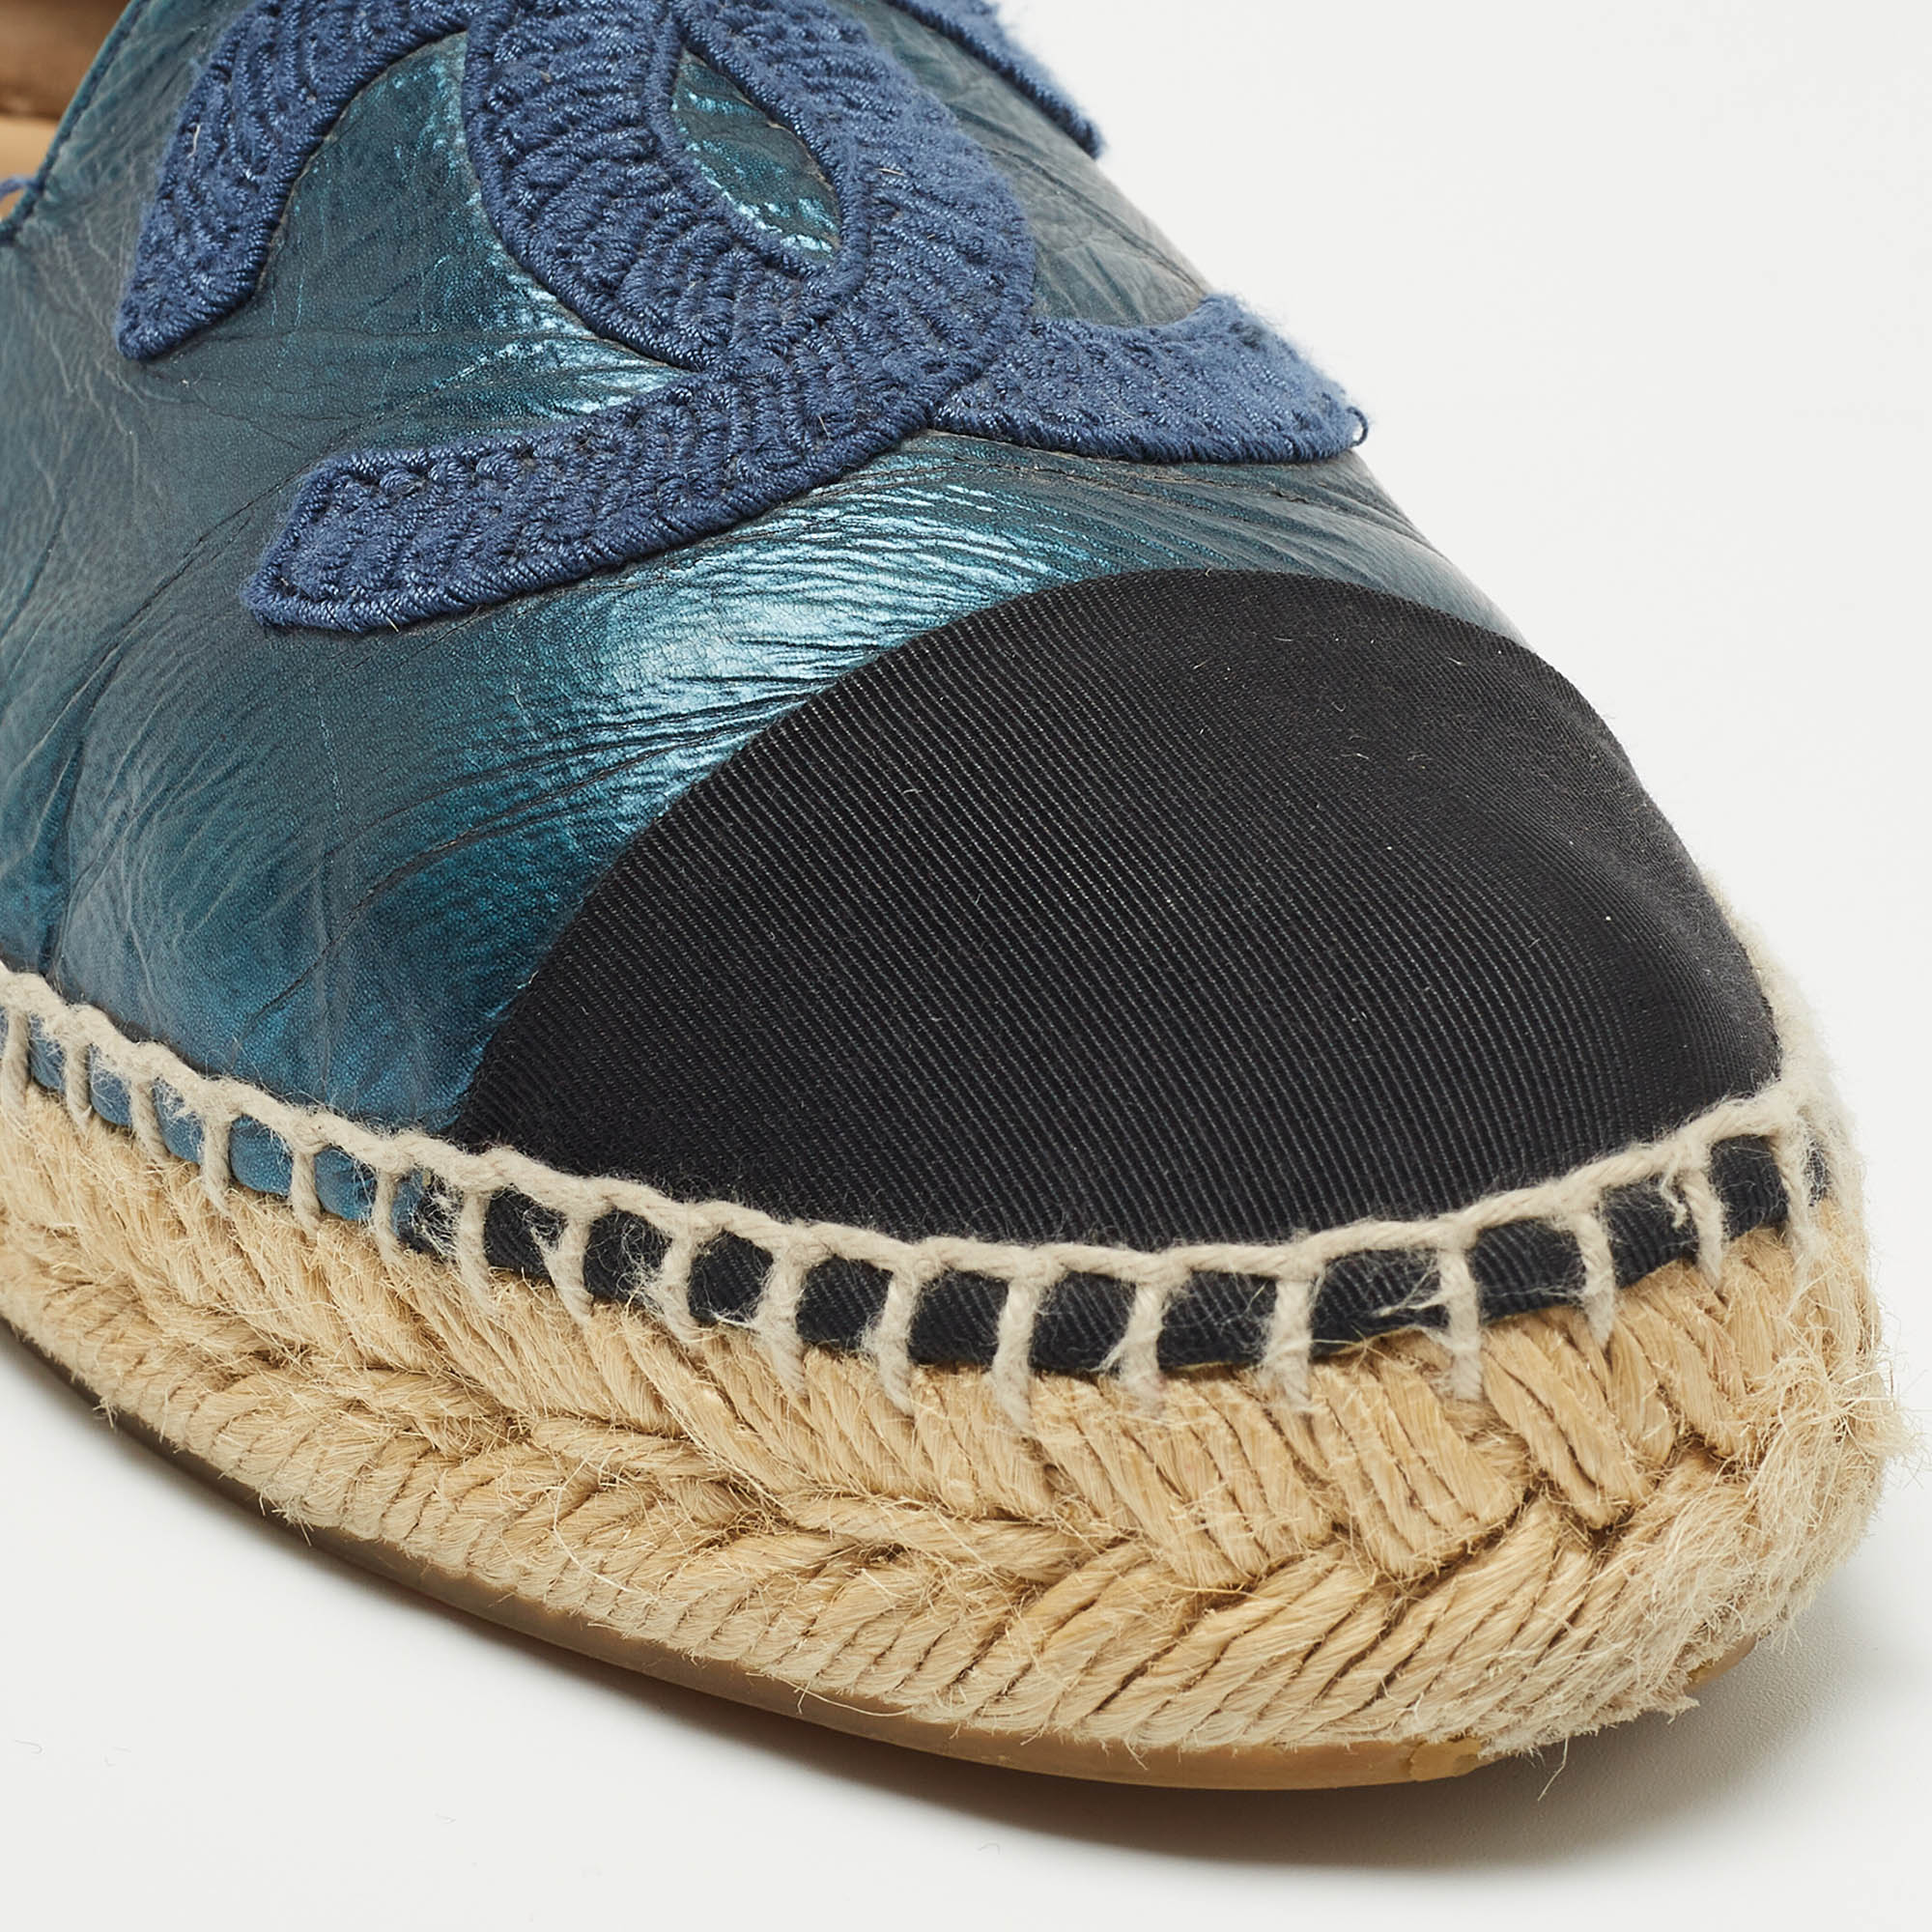 Chanel Blue/Black Leather And Canvas CC  Espadrille Flats Size 36